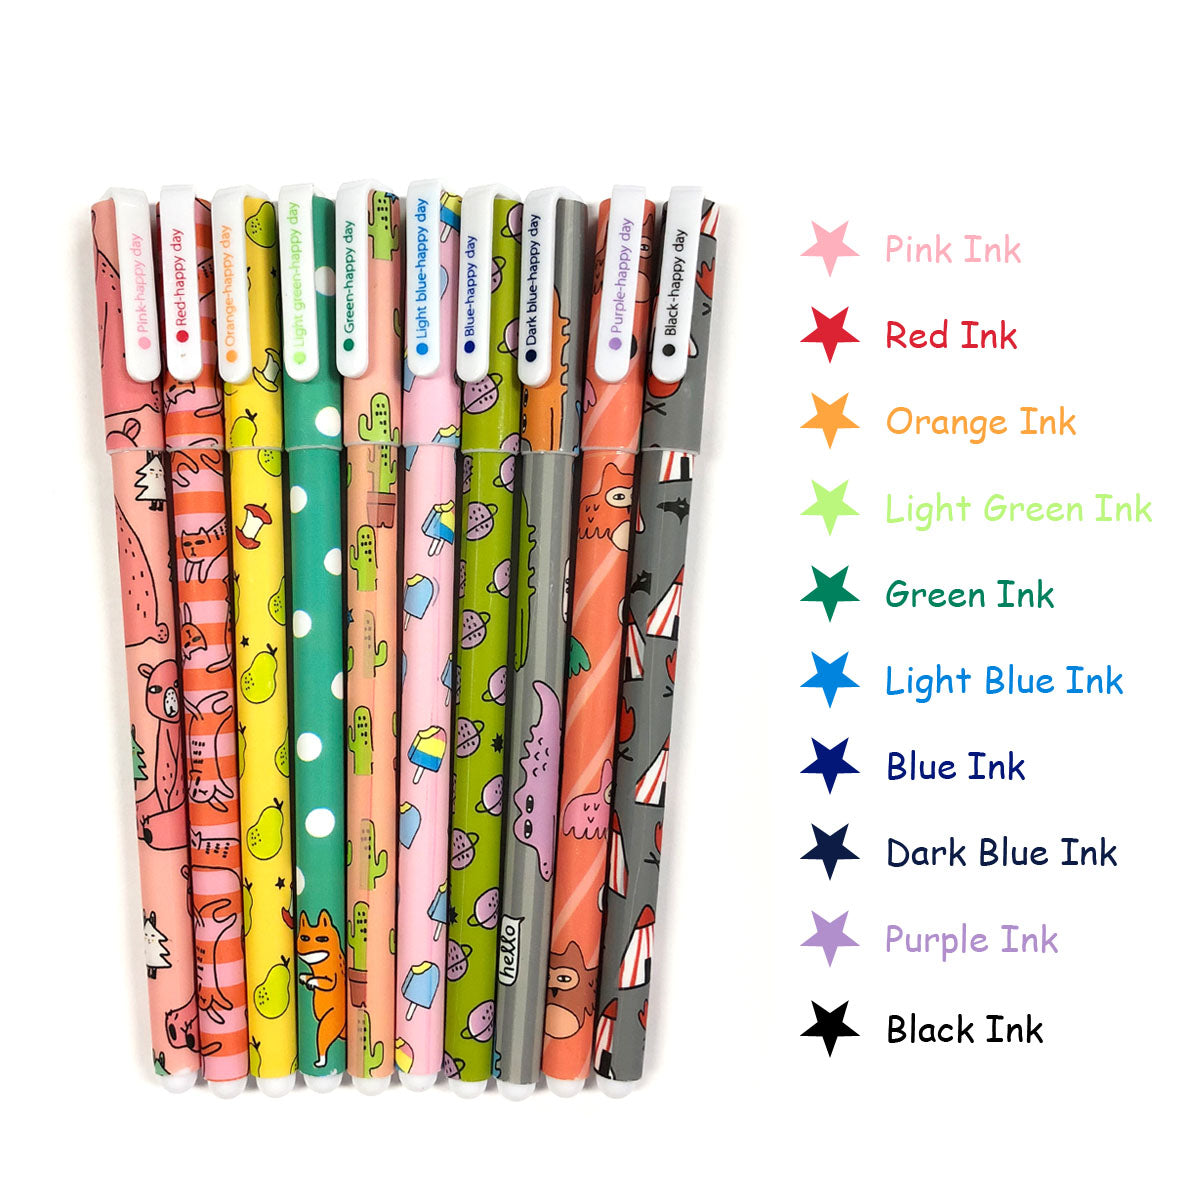 Wrapables Cute Novelty Gel Ink Pens, 0.5mm Fine Point (Set of 10) for School, Office, Stationery Whimsical Multicolor Ink